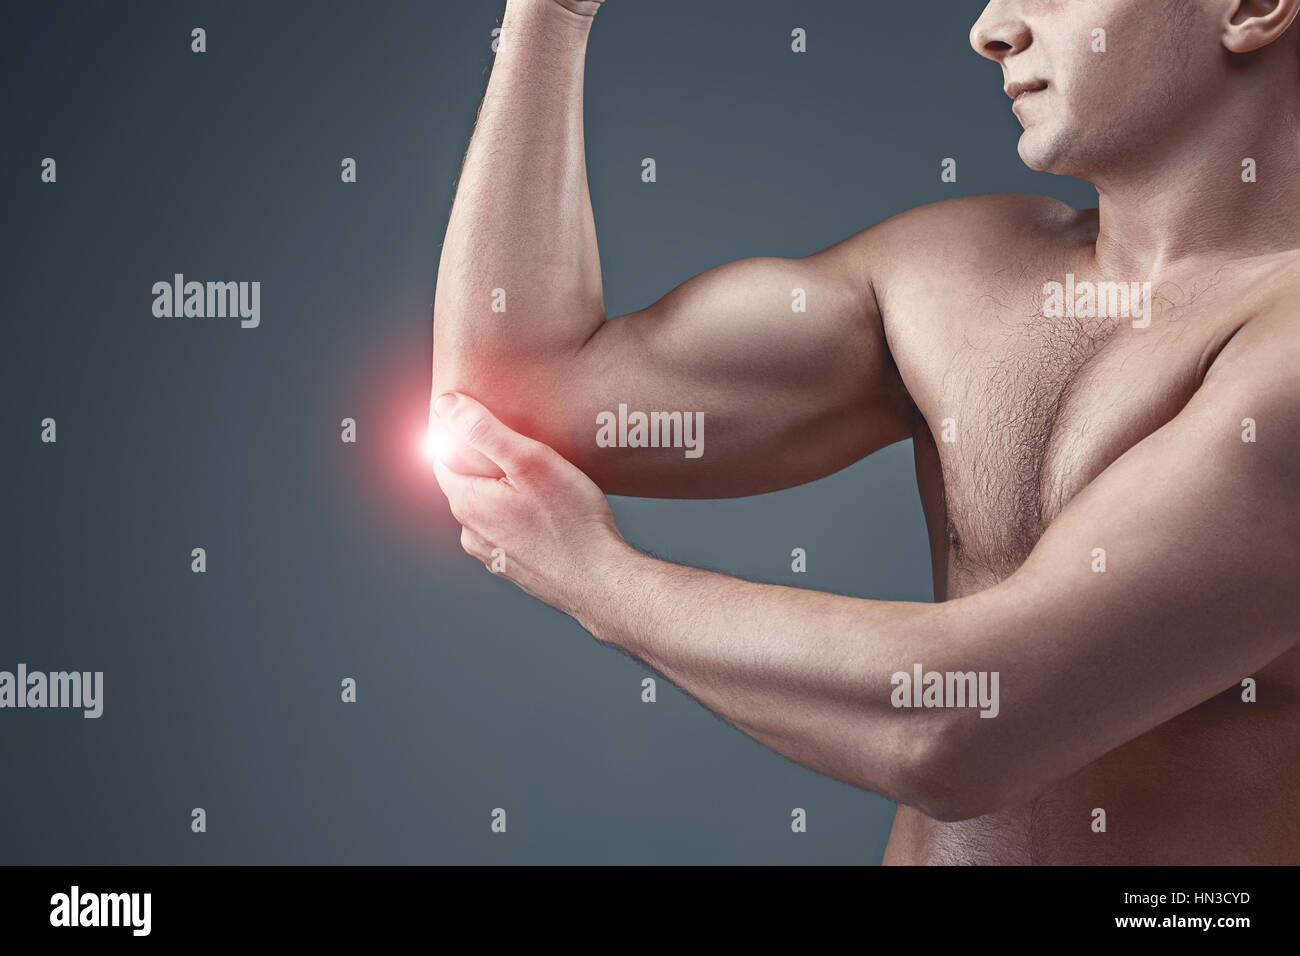 https://c8.alamy.com/comp/HN3CYD/man-with-pain-in-elbow-pain-relief-concept-HN3CYD.jpg